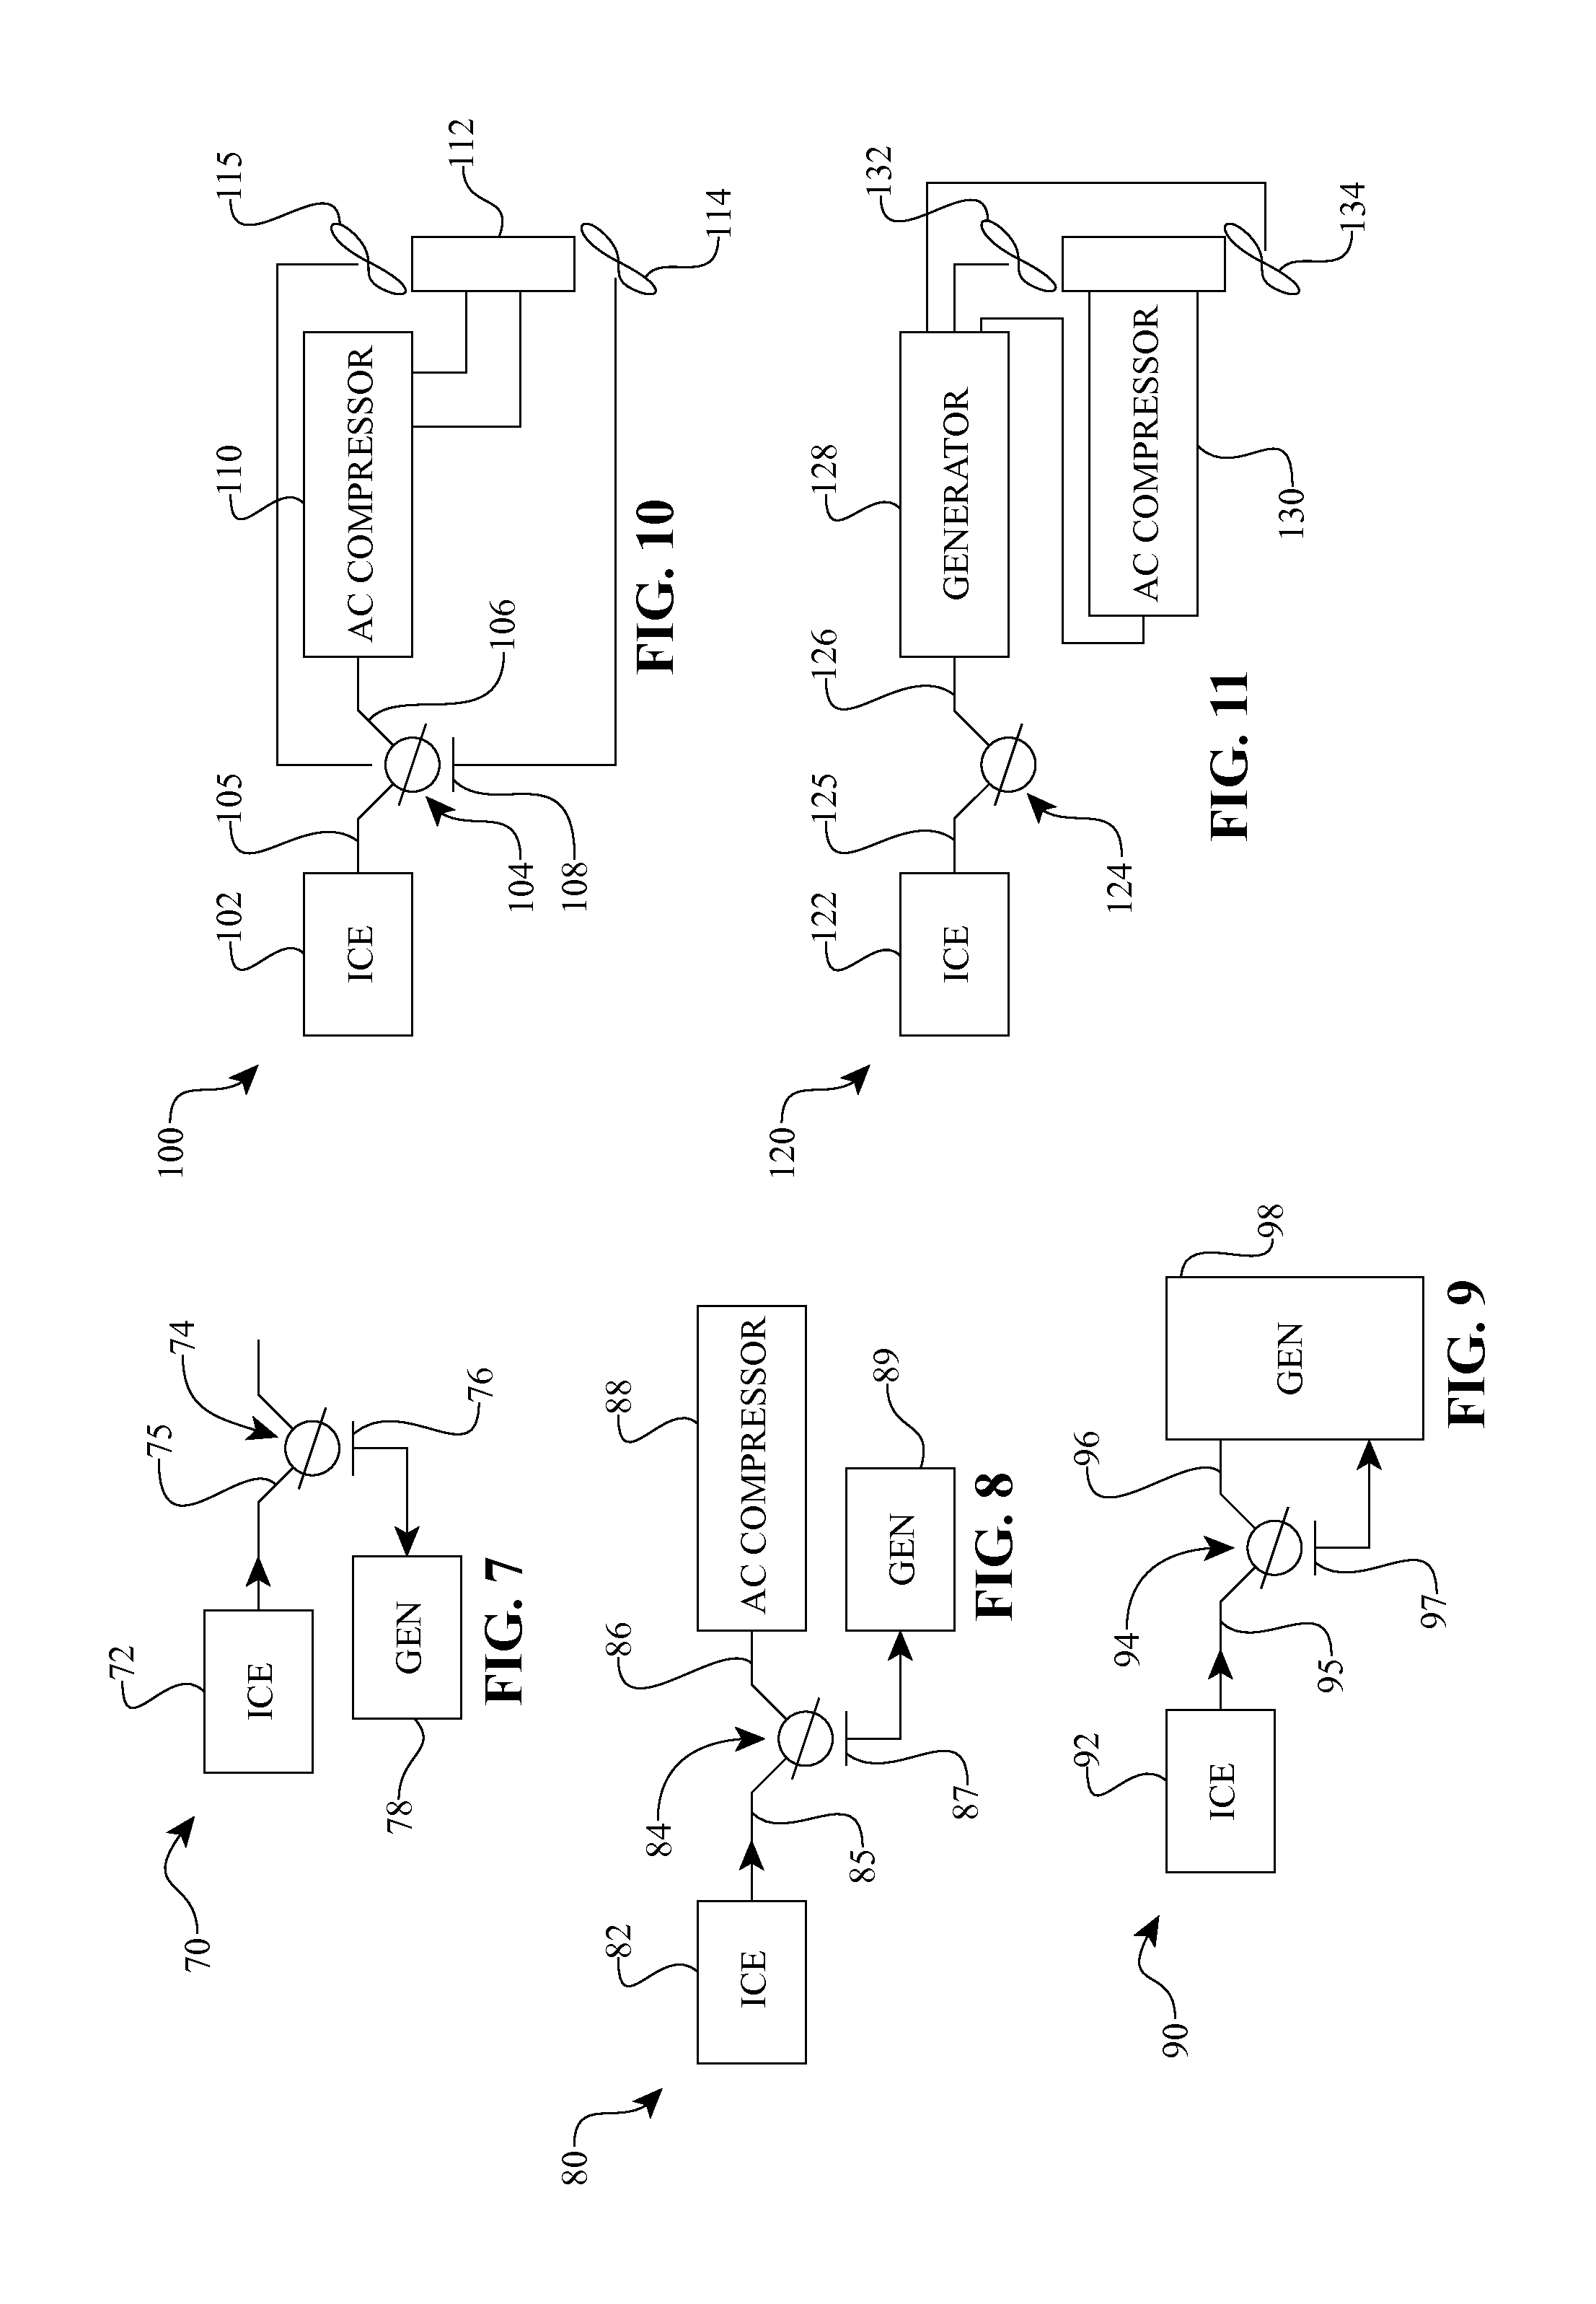 Auxiliary power unit having a continuously variable transmission